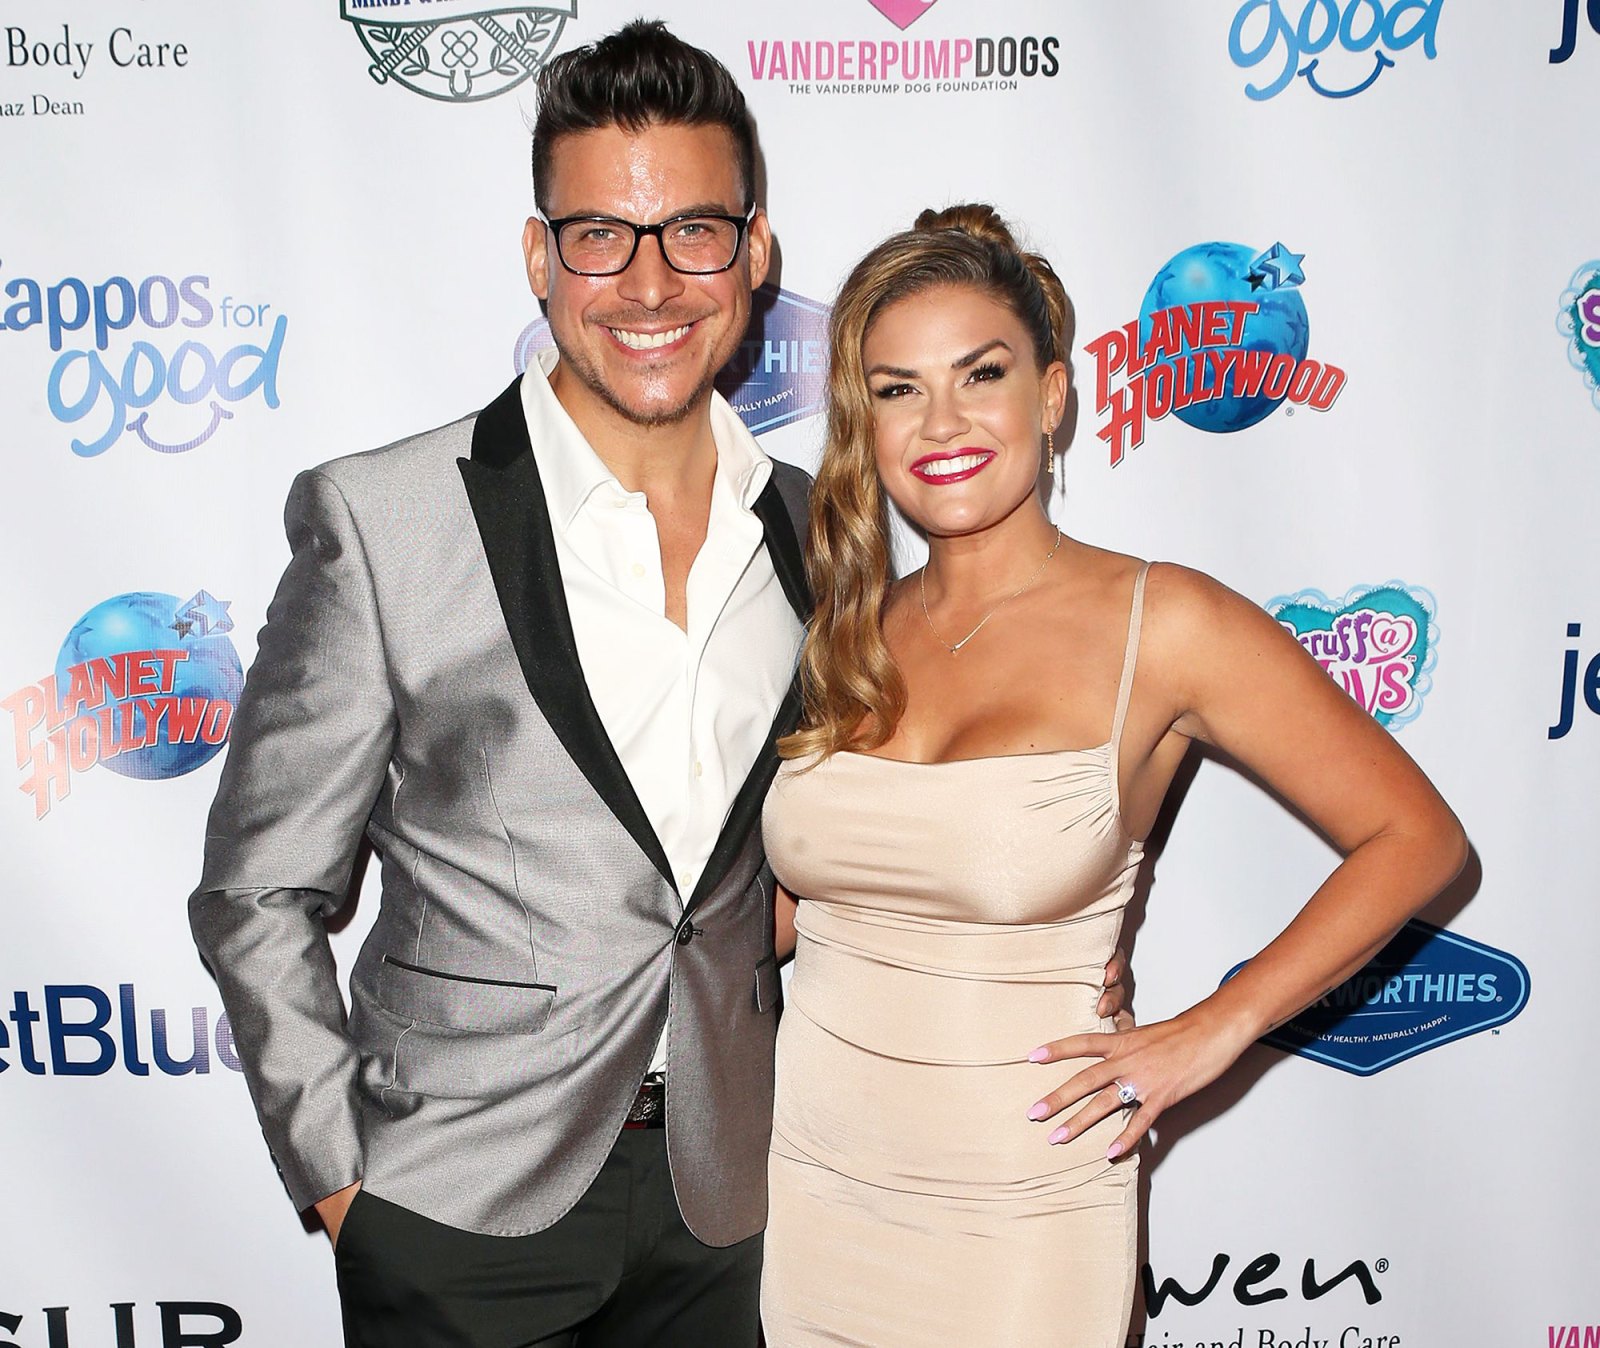 Jax Taylor and Brittany Cartwright 3rd Annual Vanderpump Dog Foundation Gala Pregnant Brittany Cartwright and Jax Taylor Quotes About Starting a Family